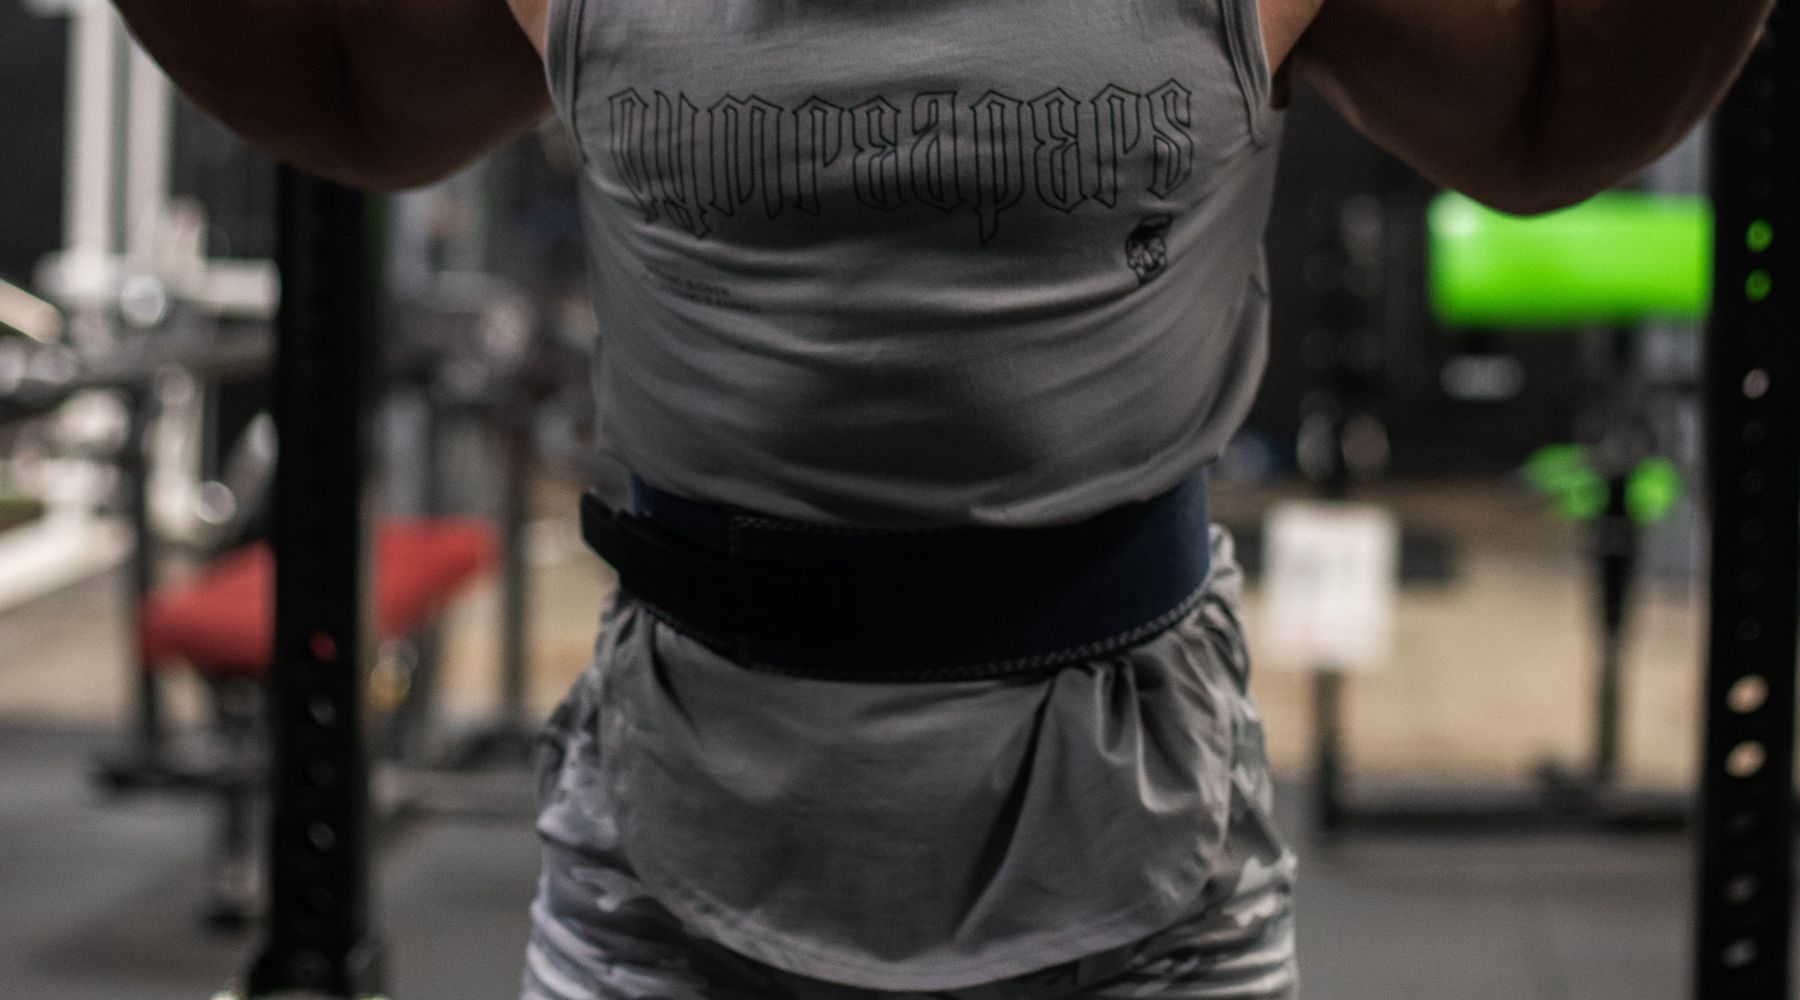 Should You Wear Wrist Wraps For Deadlifts? And, Do They Help?